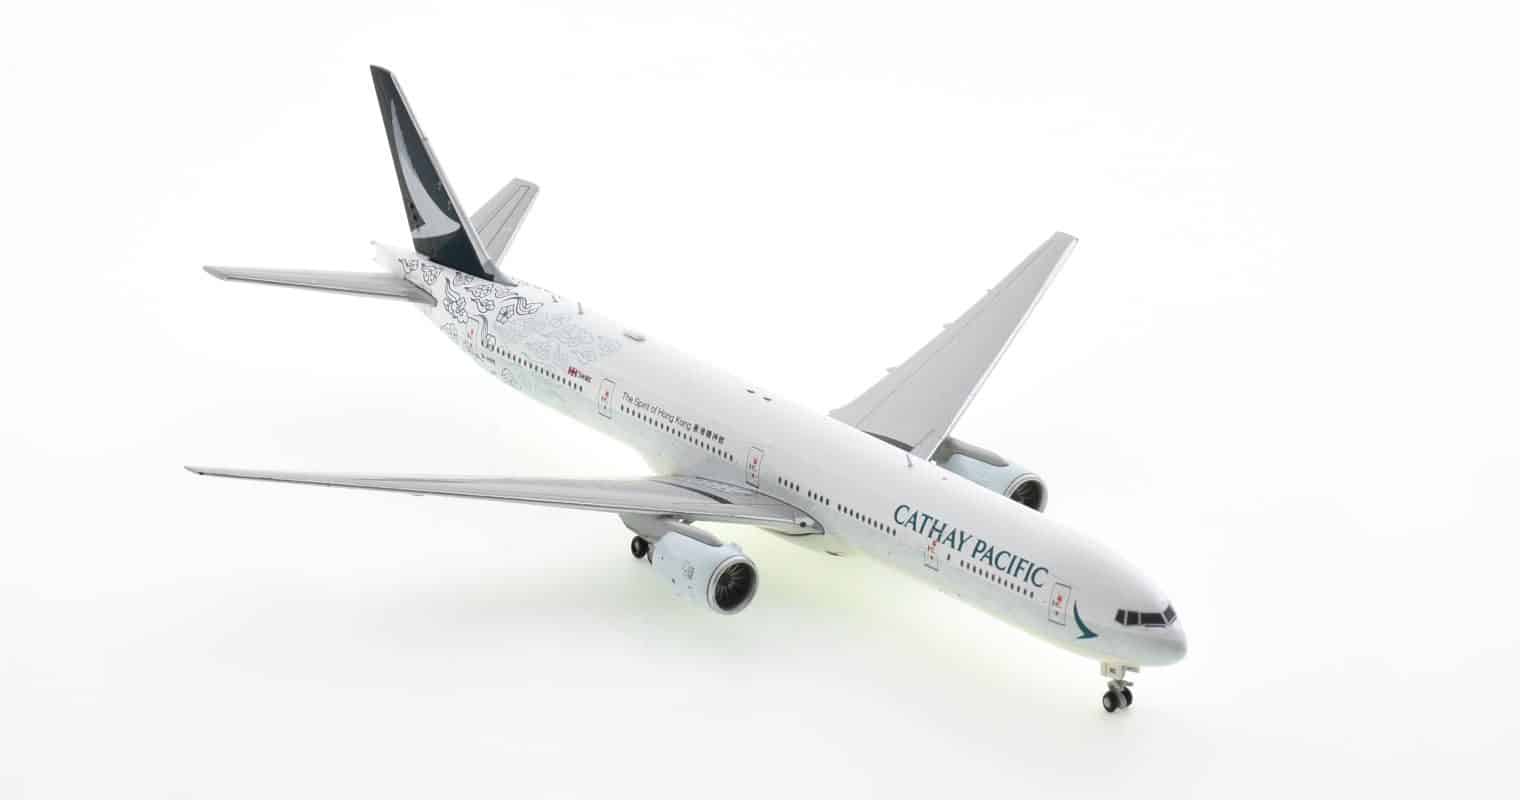 Front starboard side view of BT400-777-3-001 - 1/200 scale diecast model B777-300 of registration B-HNK in Cathay Pacific's 